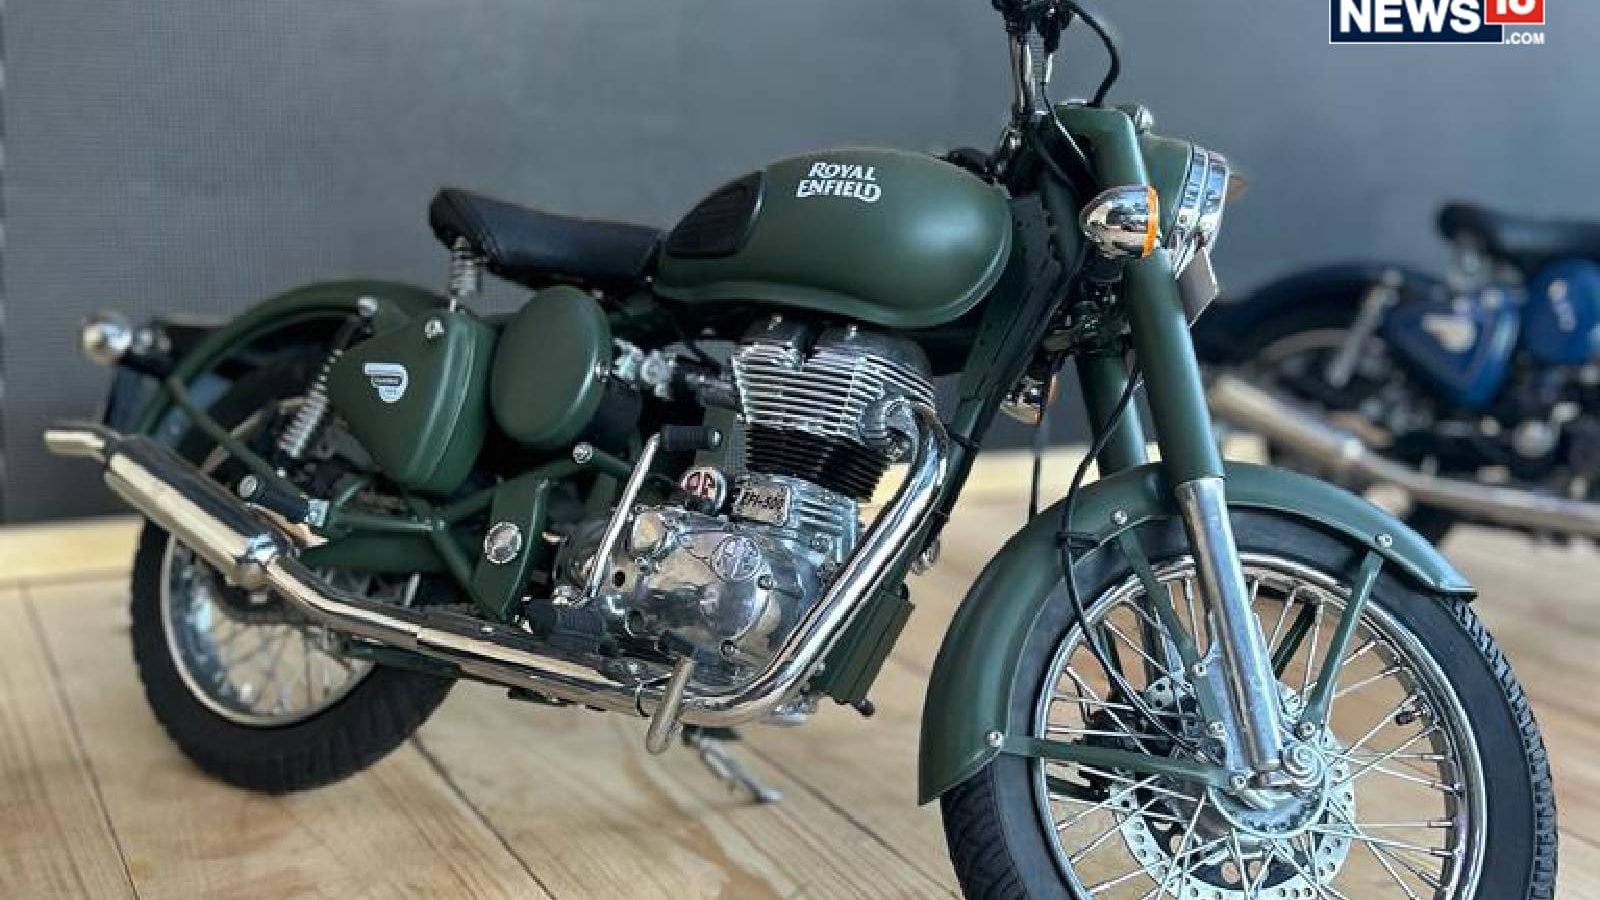 Rider Mania 2022: Royal Enfield Showcases Handcrafted Scale Models ...